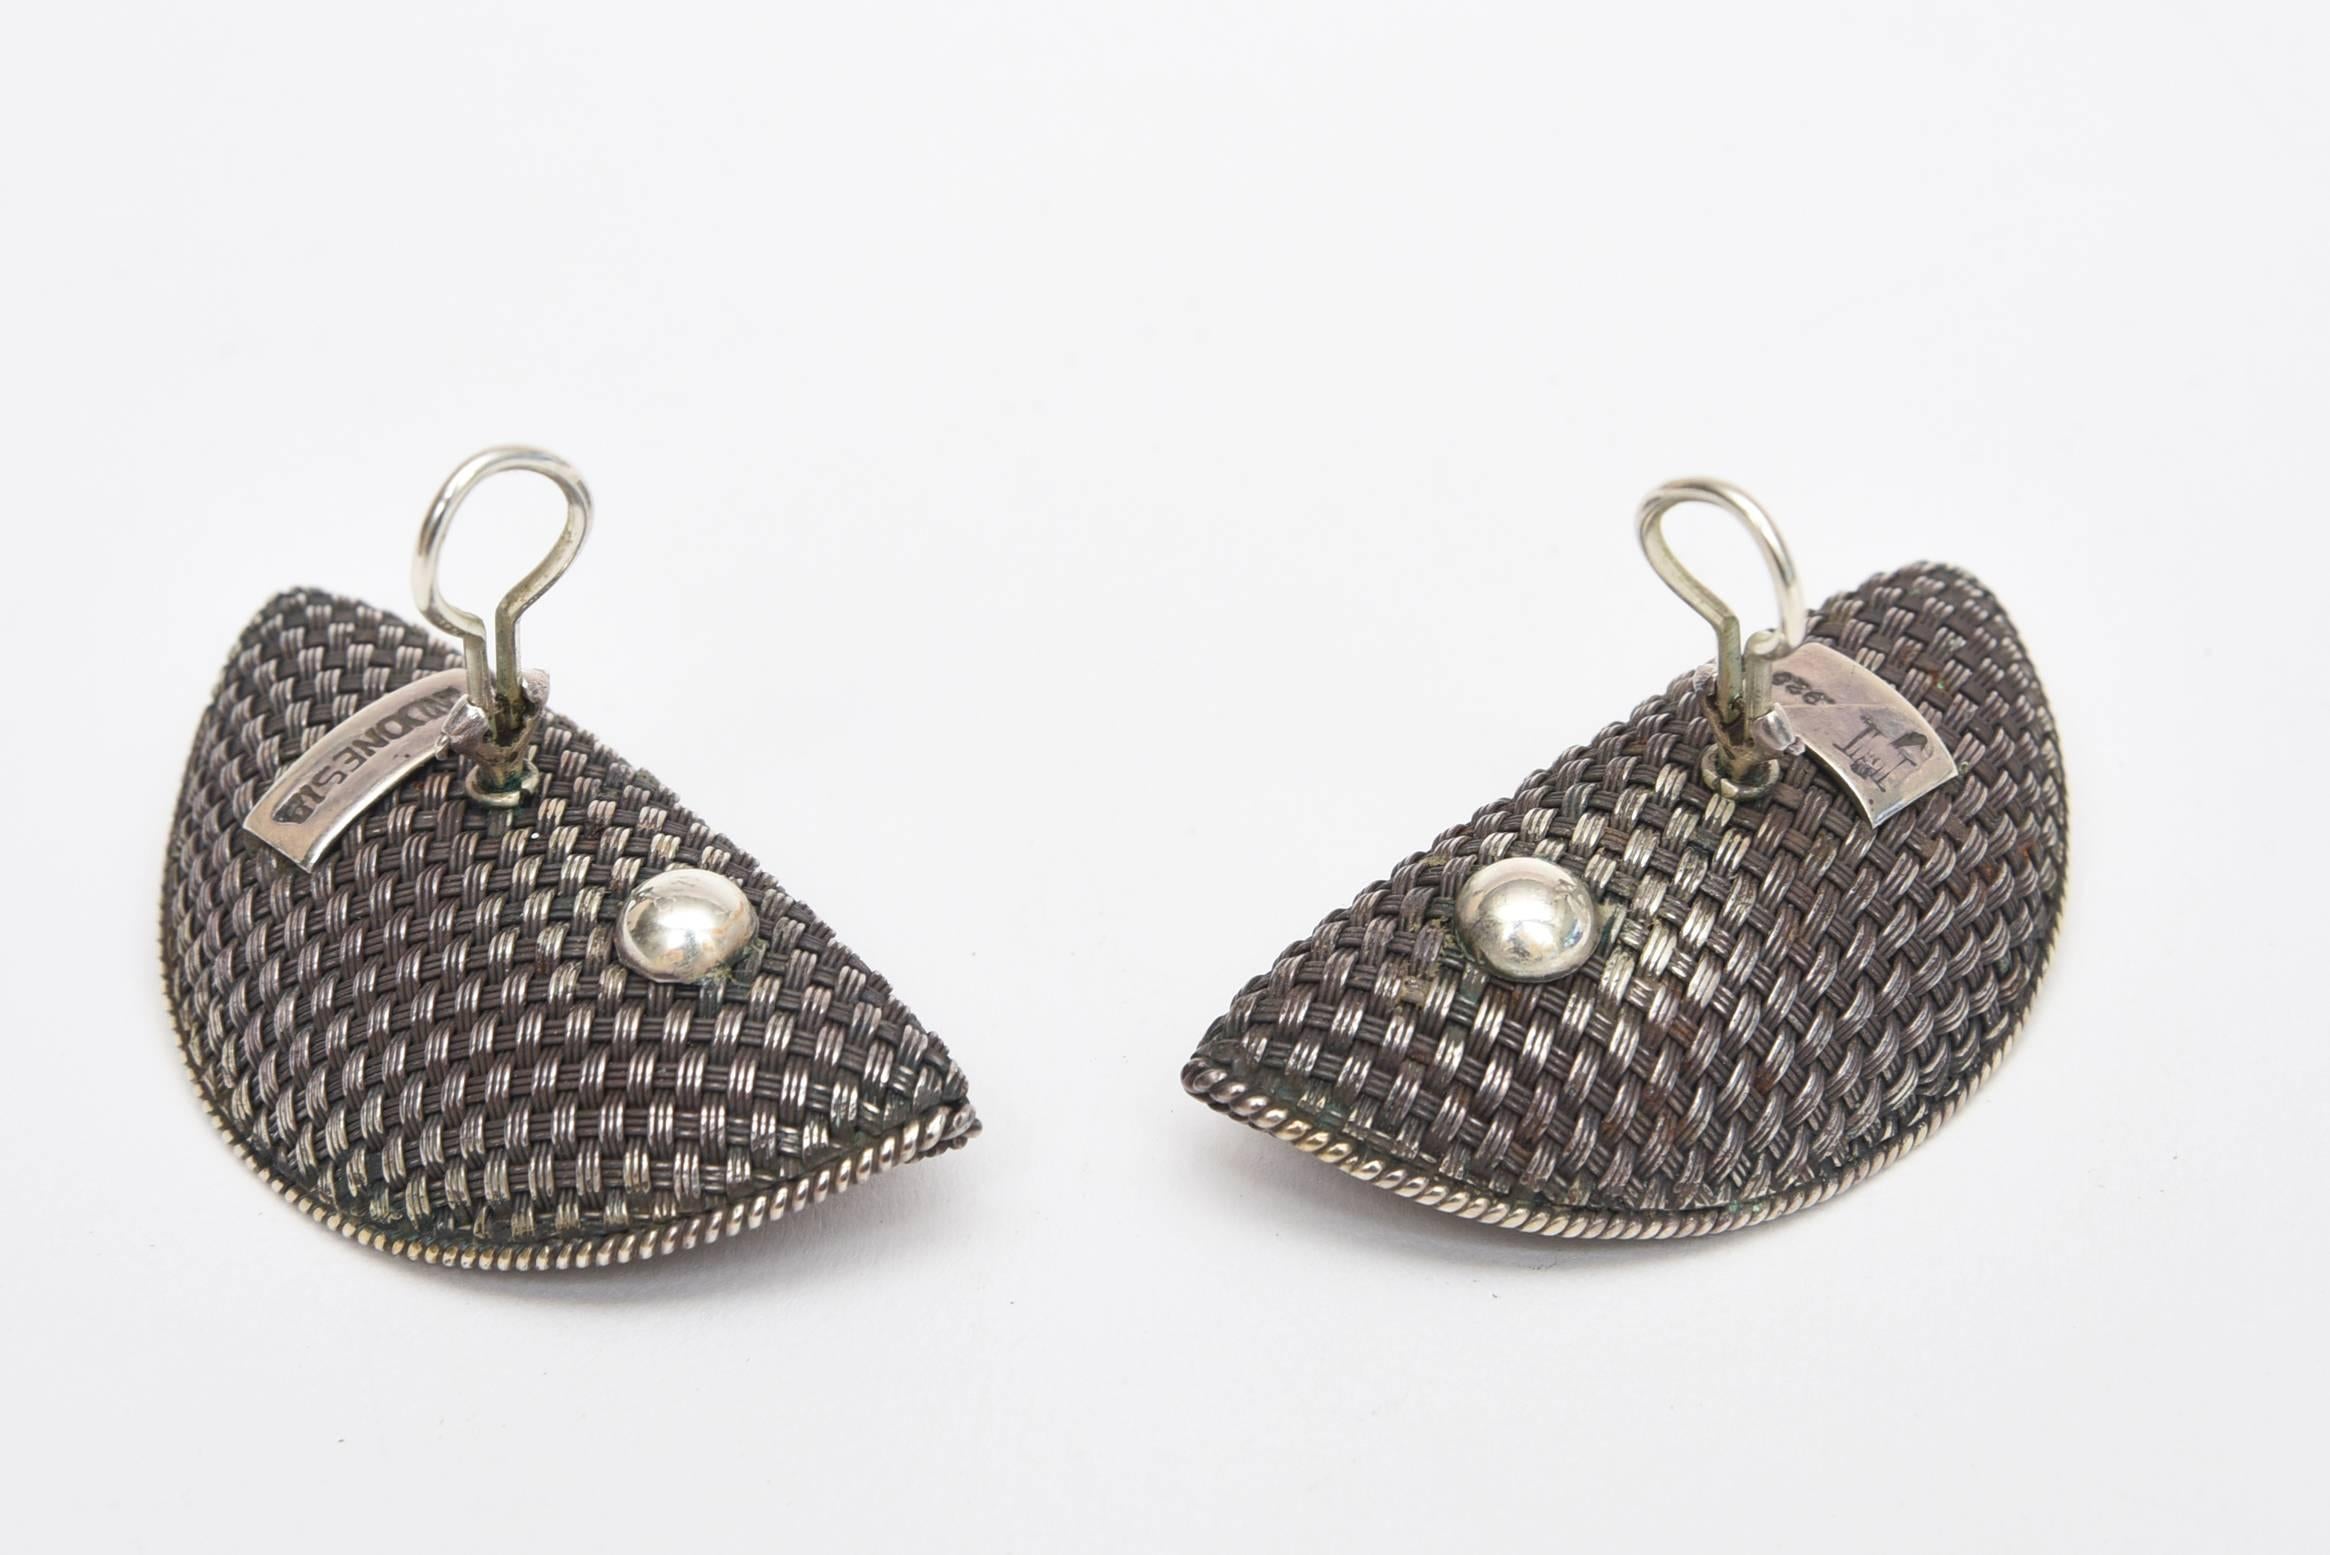 Vintage John Hardy Woven Sterling Silver Sculptural Clip On Earrings In Good Condition For Sale In North Miami, FL